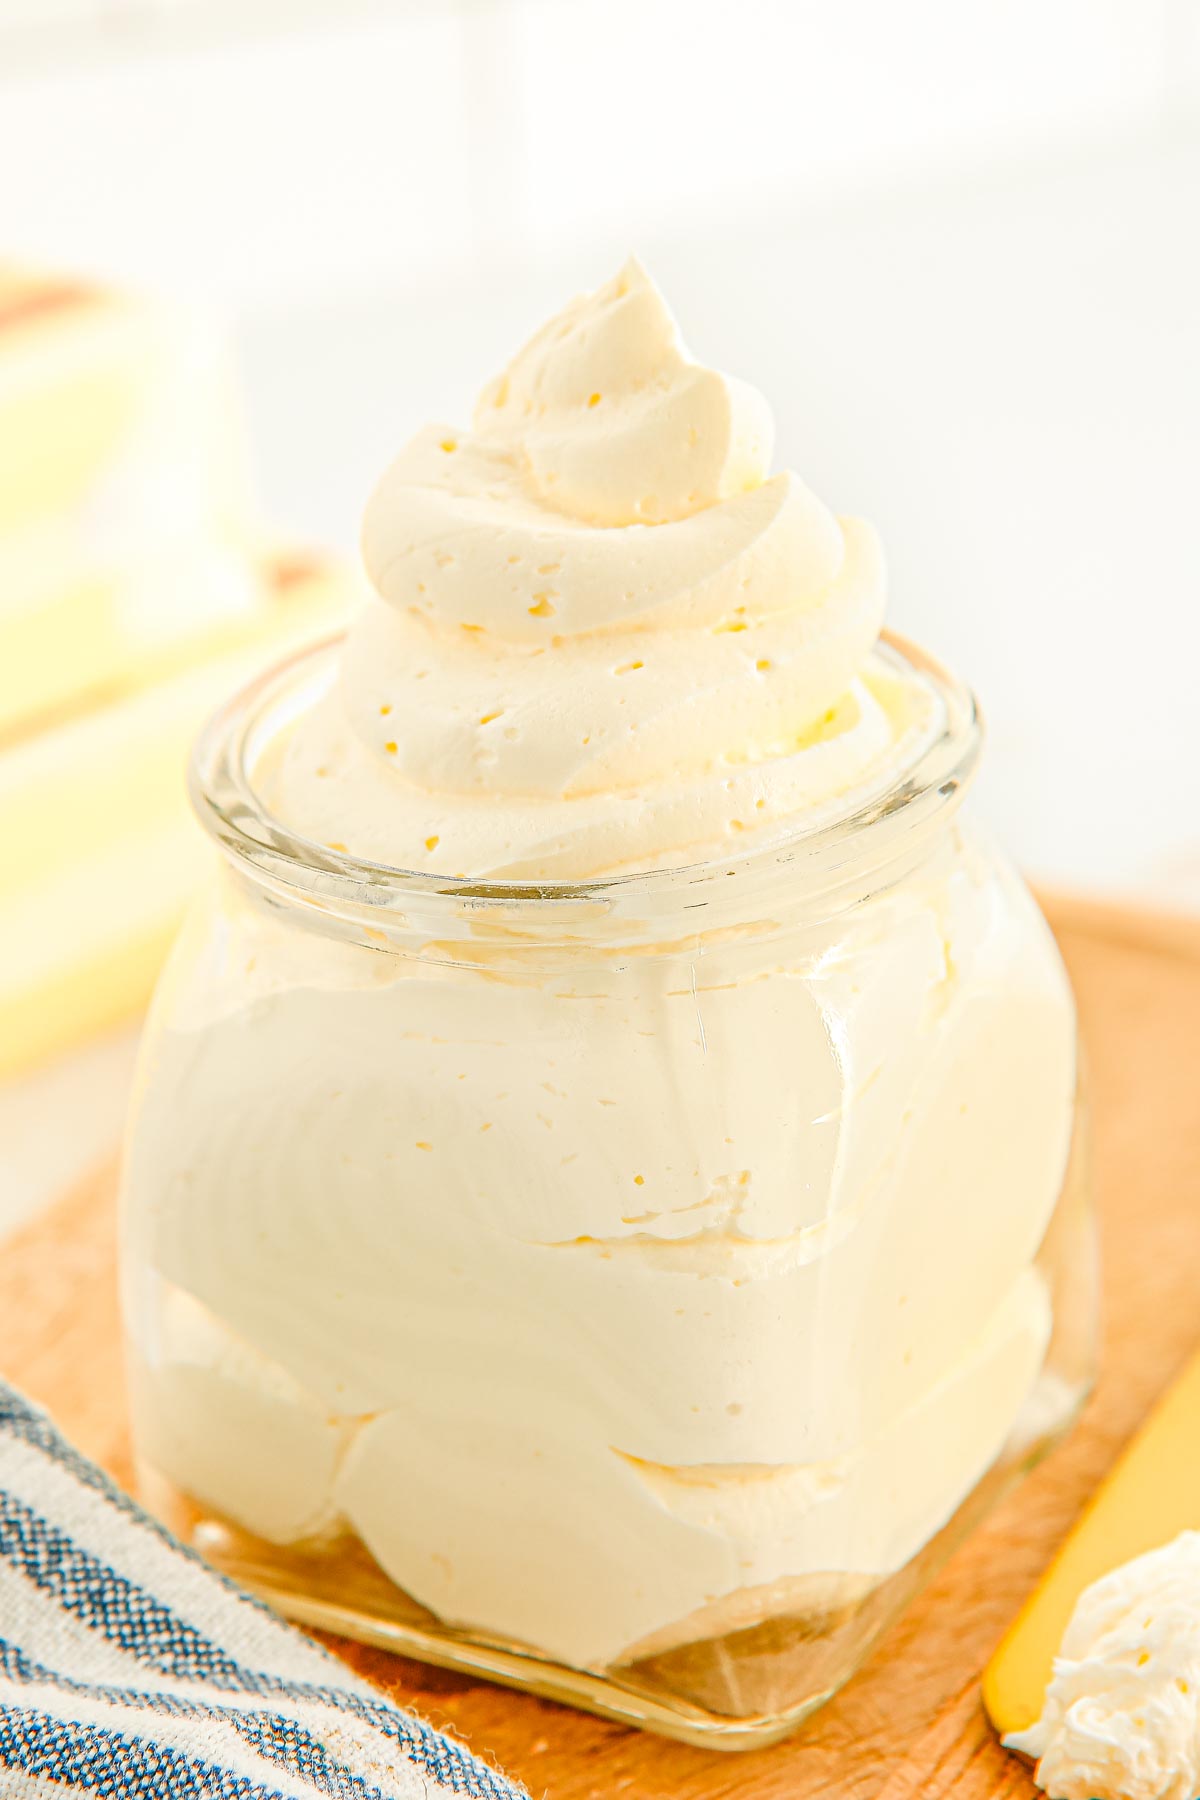 A close up picture of the finished Whipped Butter in a glass jar.